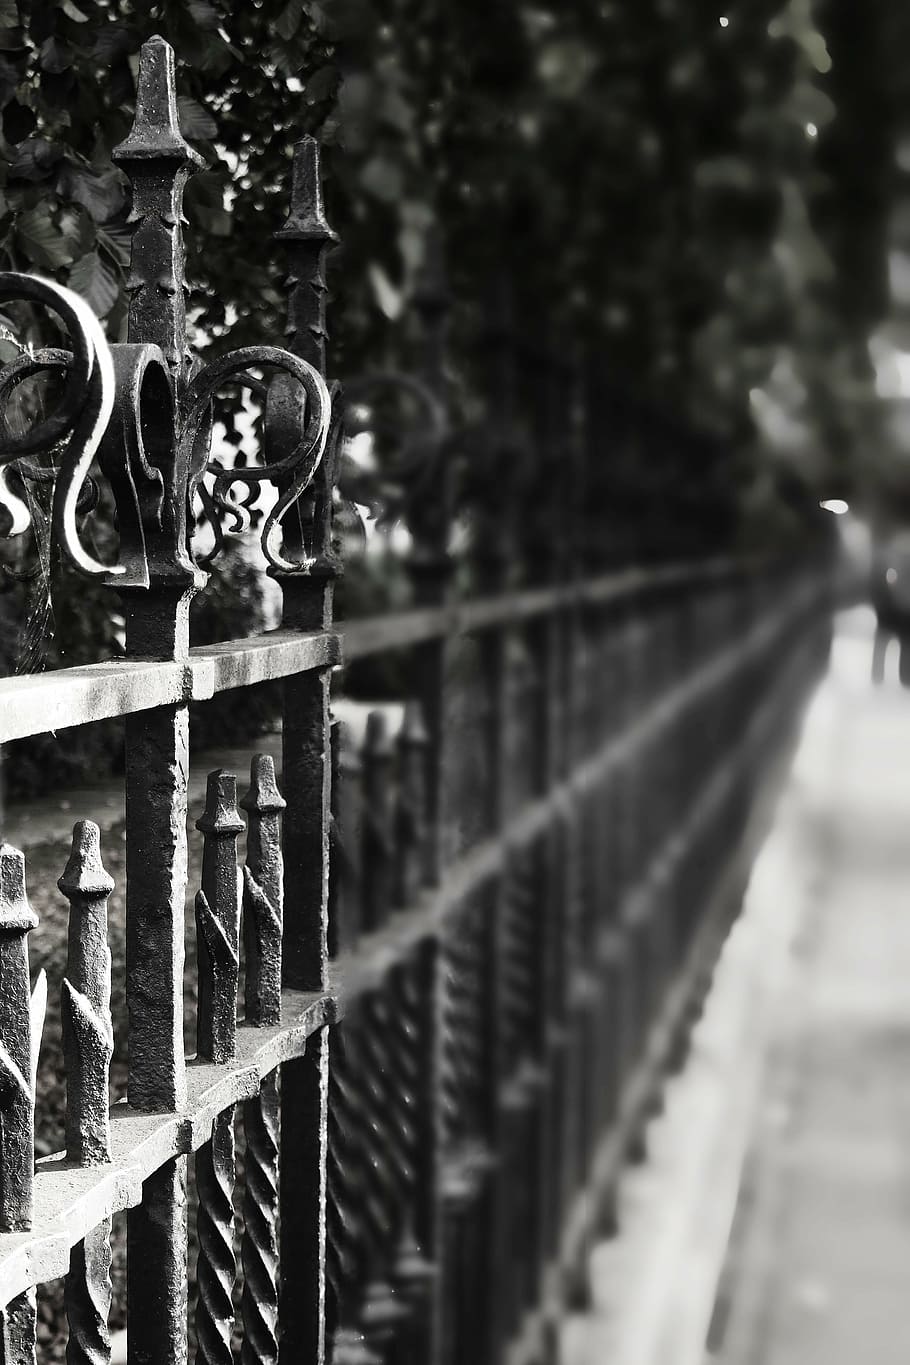 fence, iron, grid, metal, old, iron construction, wrought iron, artfully, metal fence, art forging